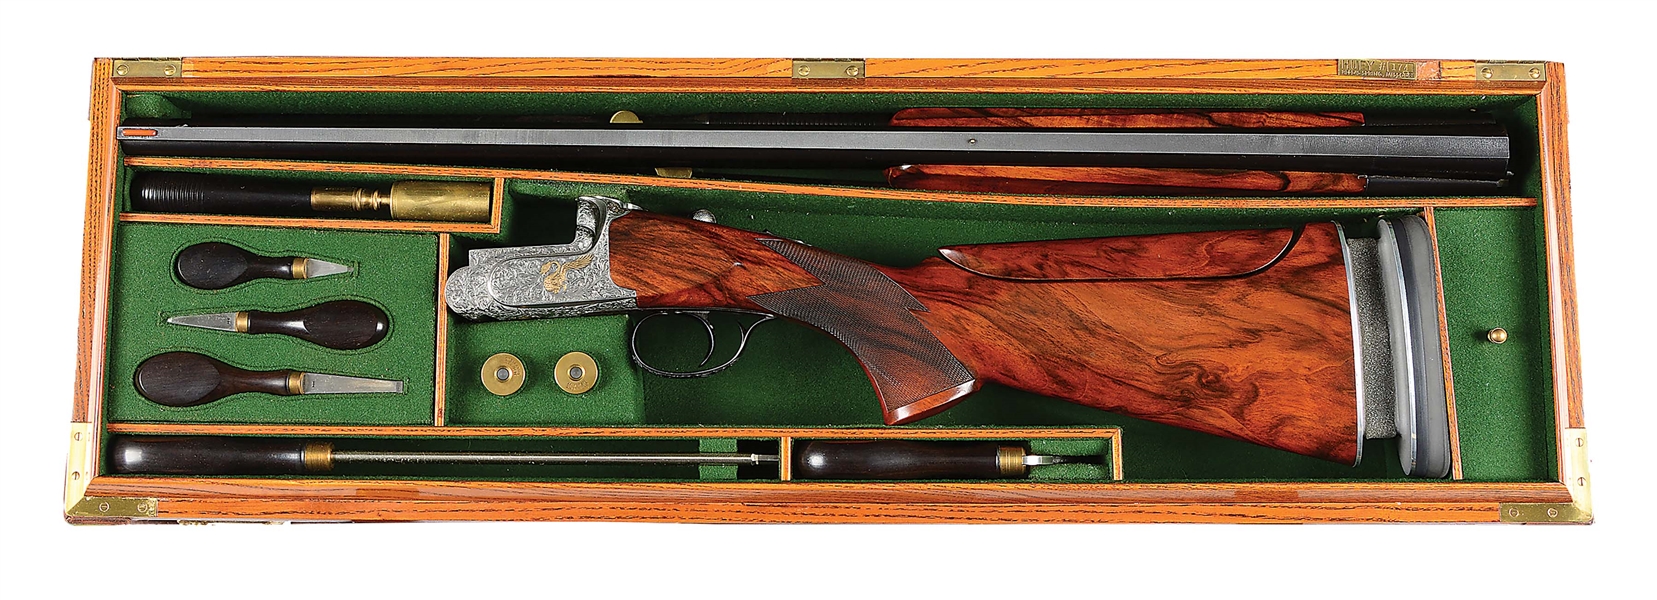 (M) PERAZZI SCO MIRAGE TARGET SHOTGUN WITH RELIEF SCROLL AND GOLD INLAY AND CASE AND ACCESSORIES.